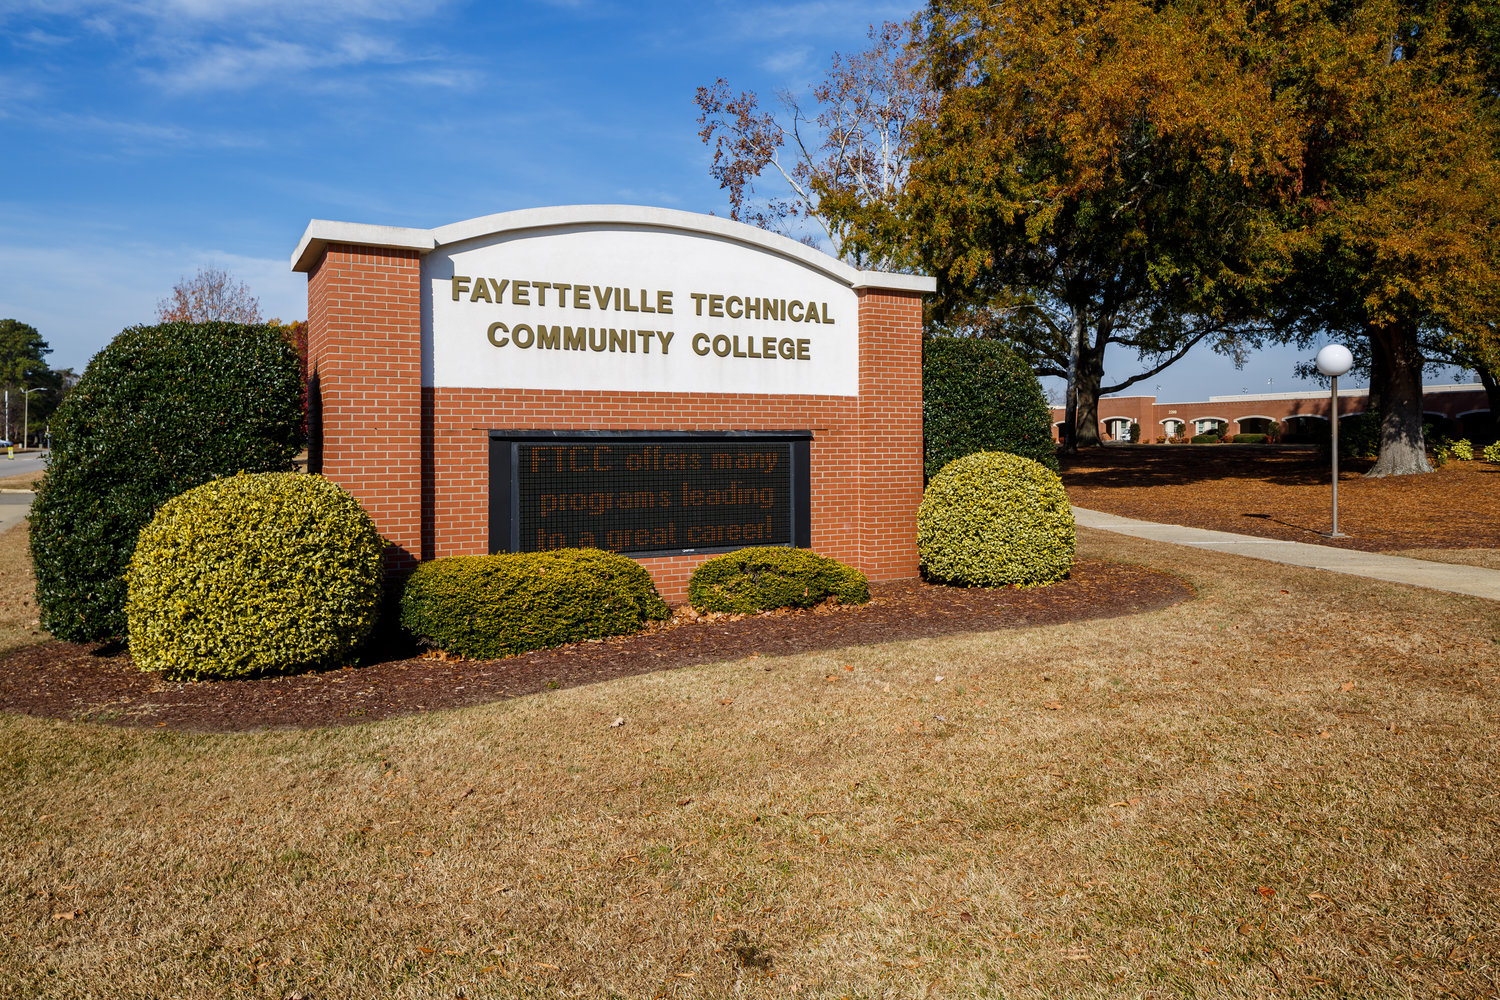 The Center for Innovation, Entrepreneurship and Small Business at Fayetteville Technical Community College will host a free seminar Saturday aimed at helping new and developing nonprofits.